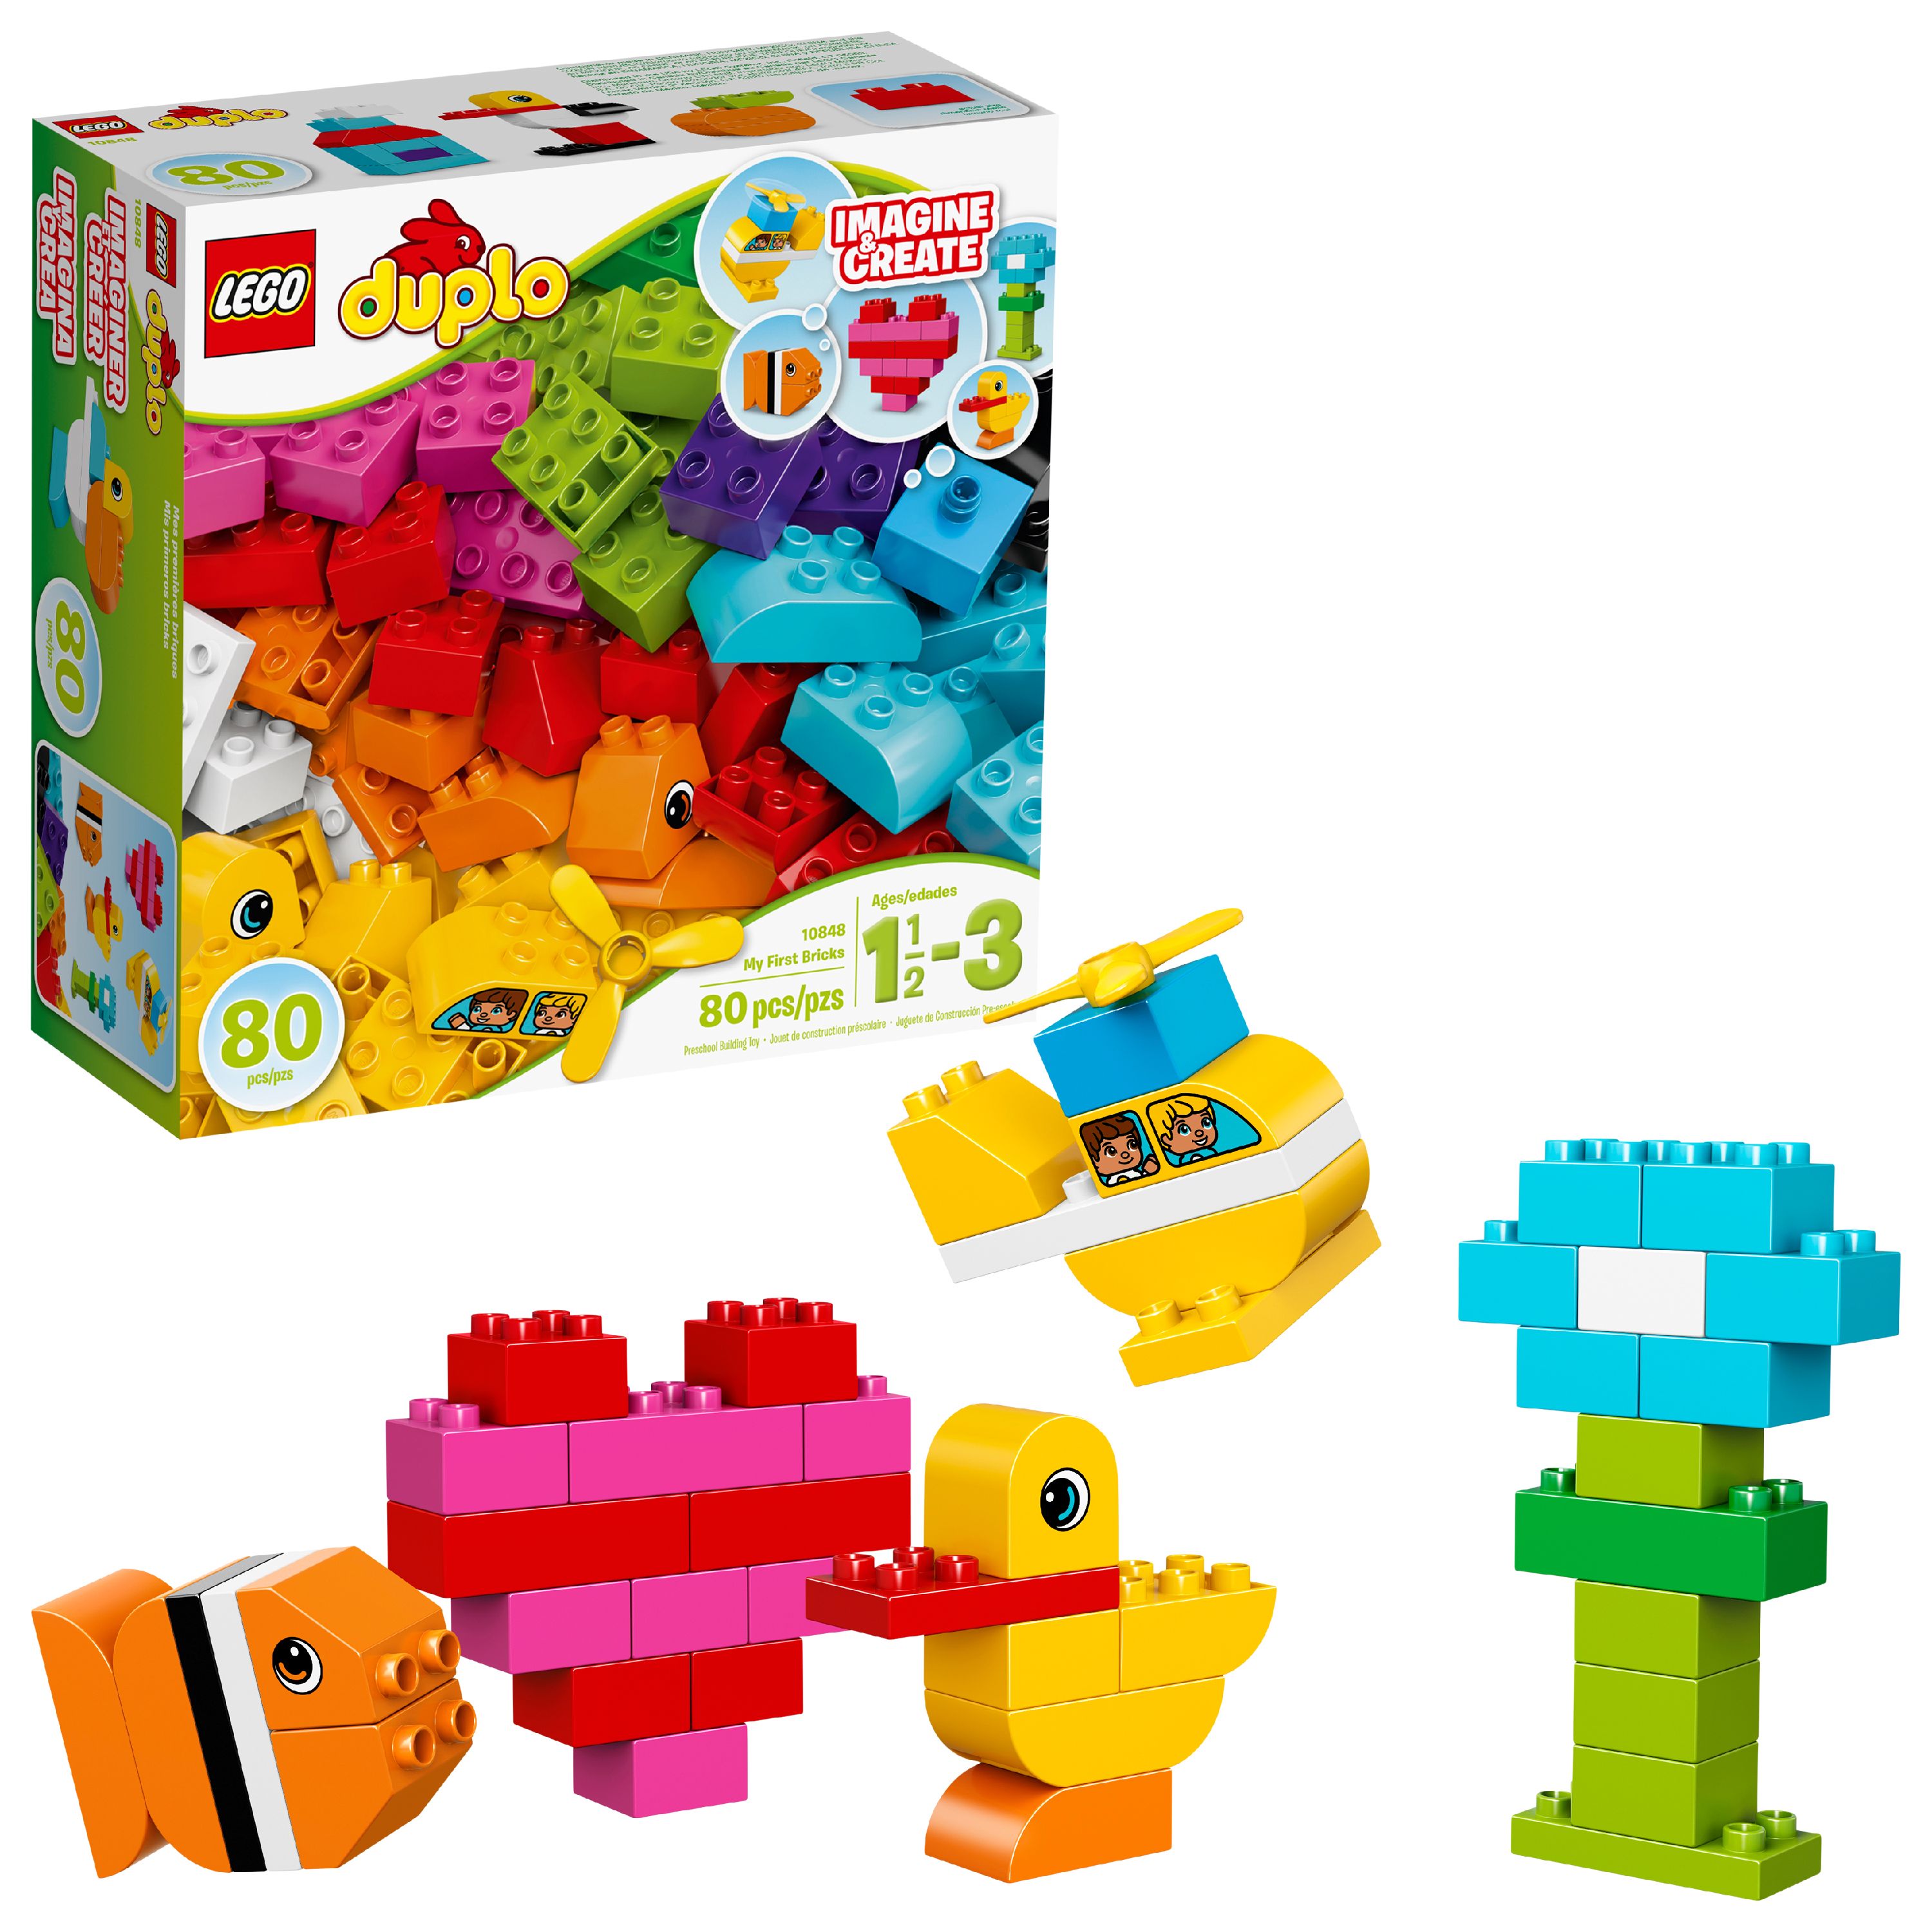 LEGO DUPLO My First Bricks 10848 Building Set (80 Pieces) - image 1 of 6